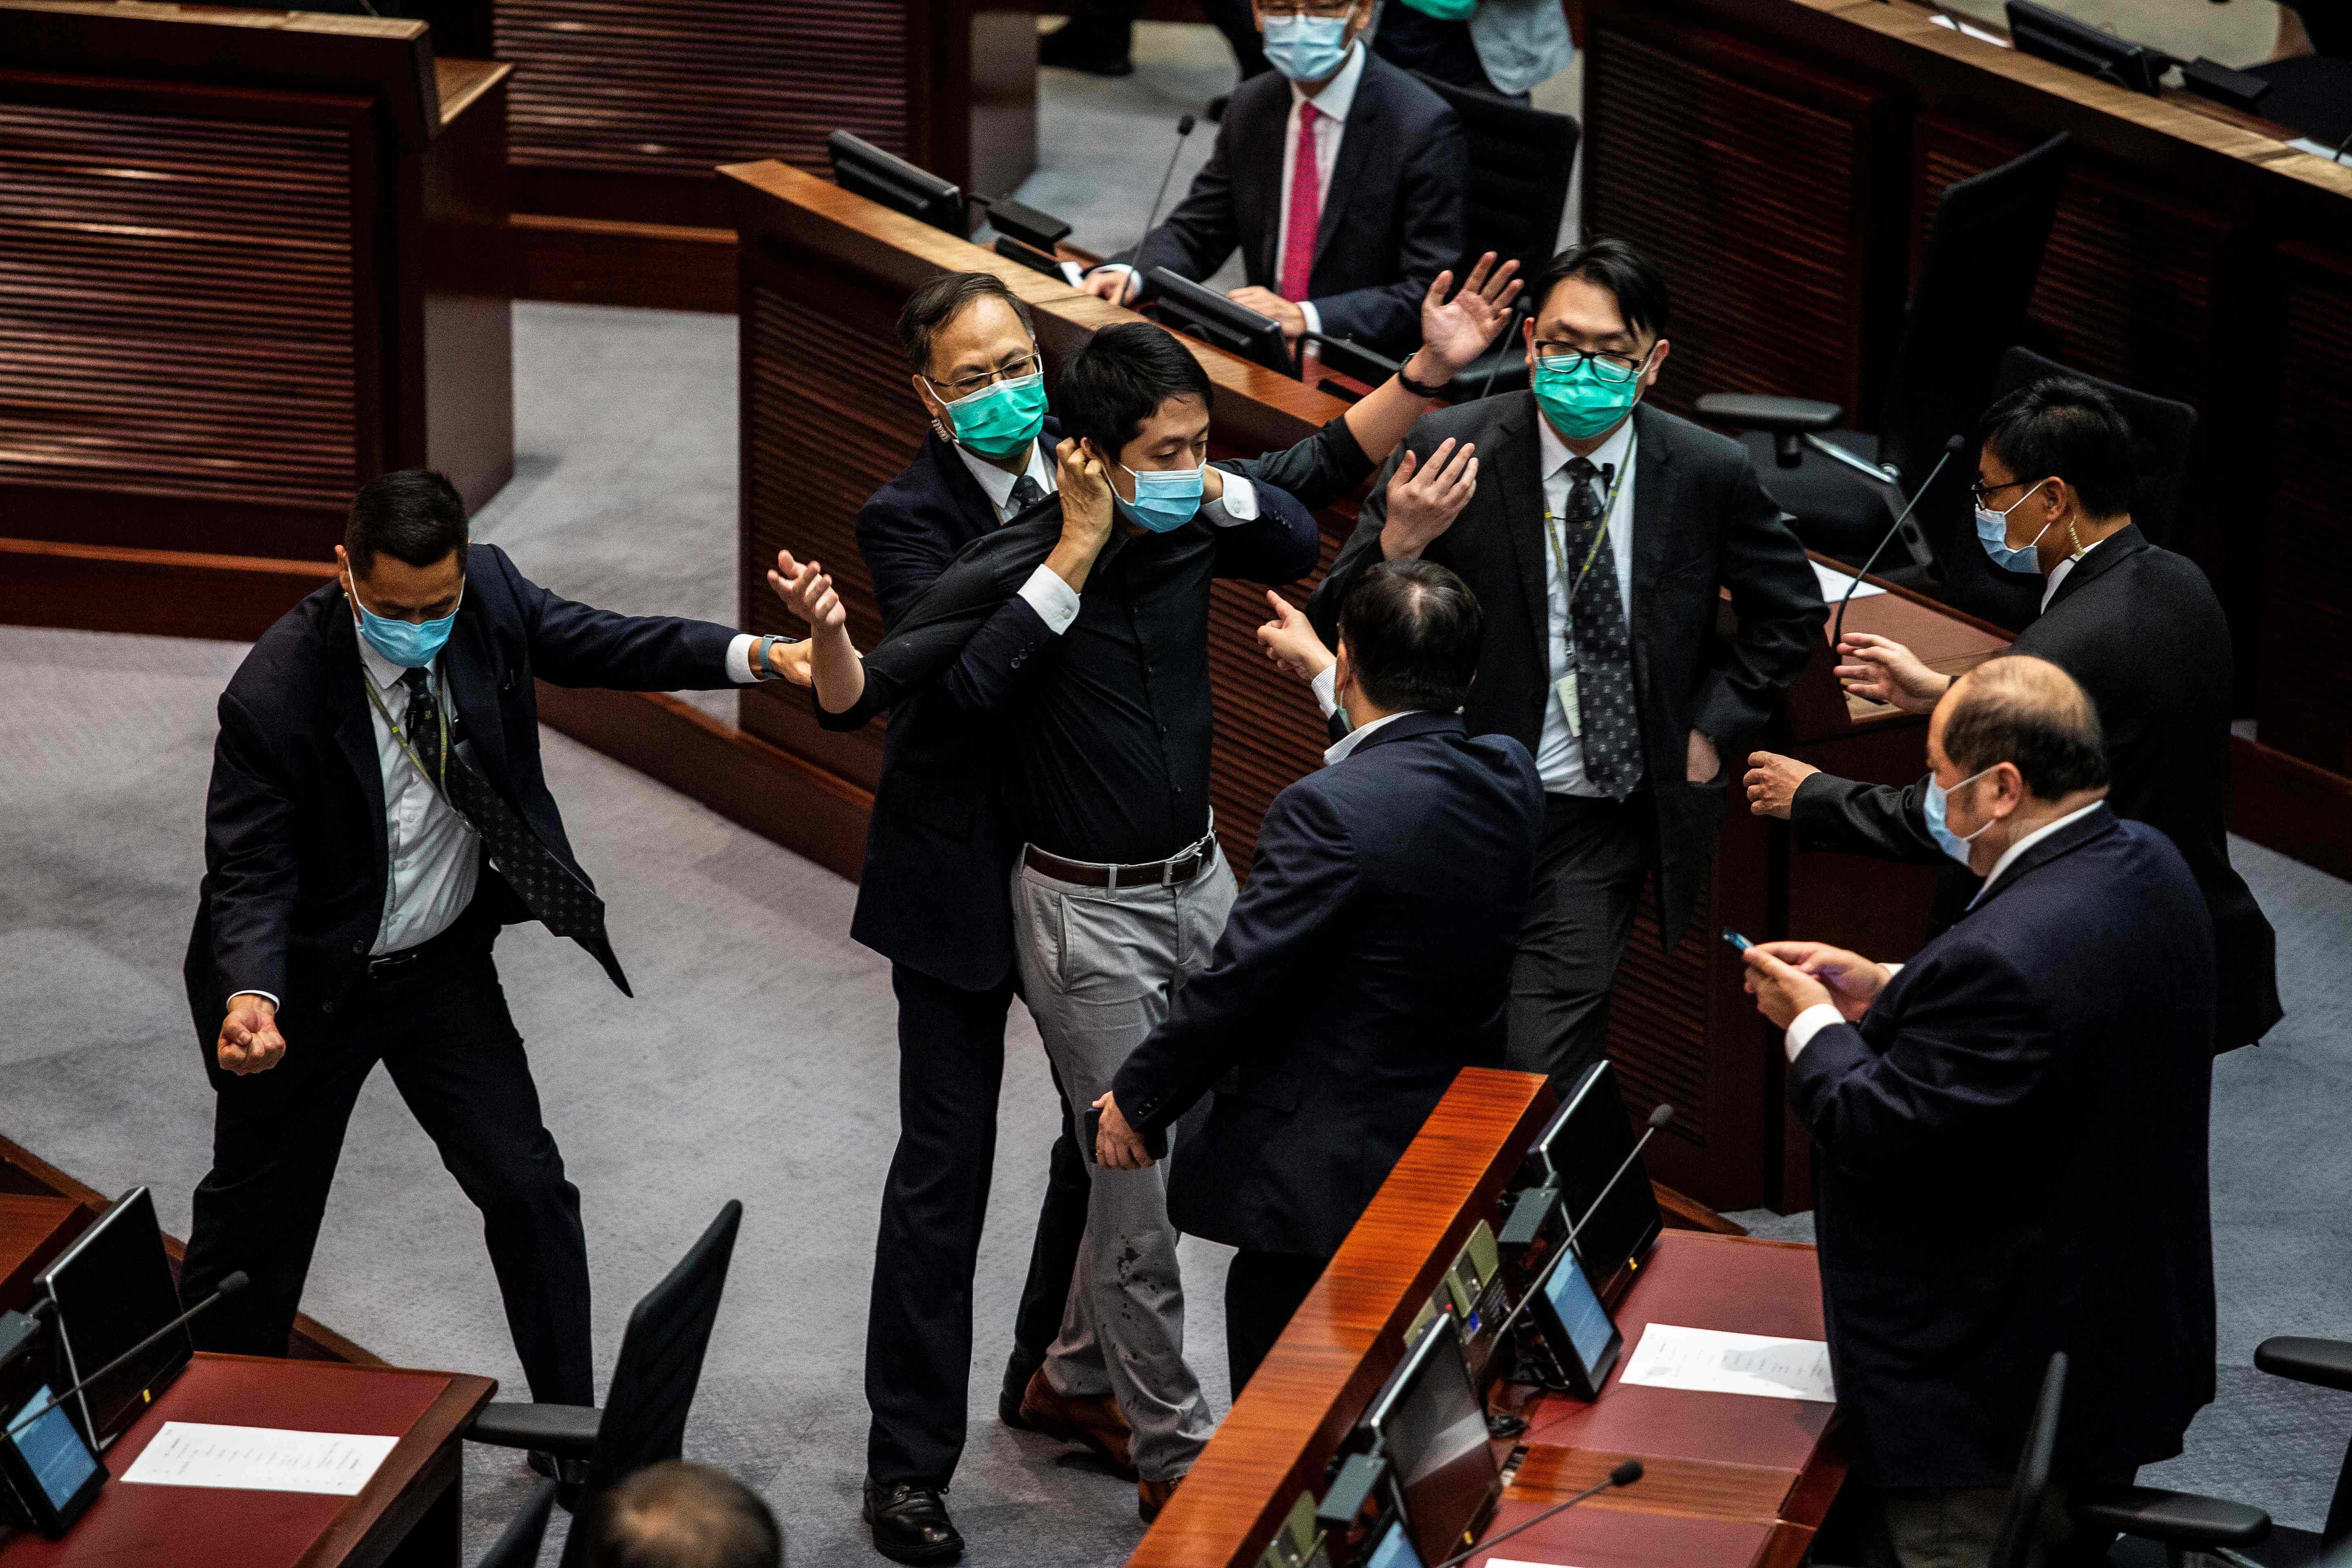 Pro-democracy legislator Ted Hui (C) is removed by security guards after throwing a jar containing a four-smelling liquid onto the floor during a debate on a law that bans insulting China's national anthem, at a session of the Legislative Council (Legco) in Hong Kong. Credit: AFP Photo